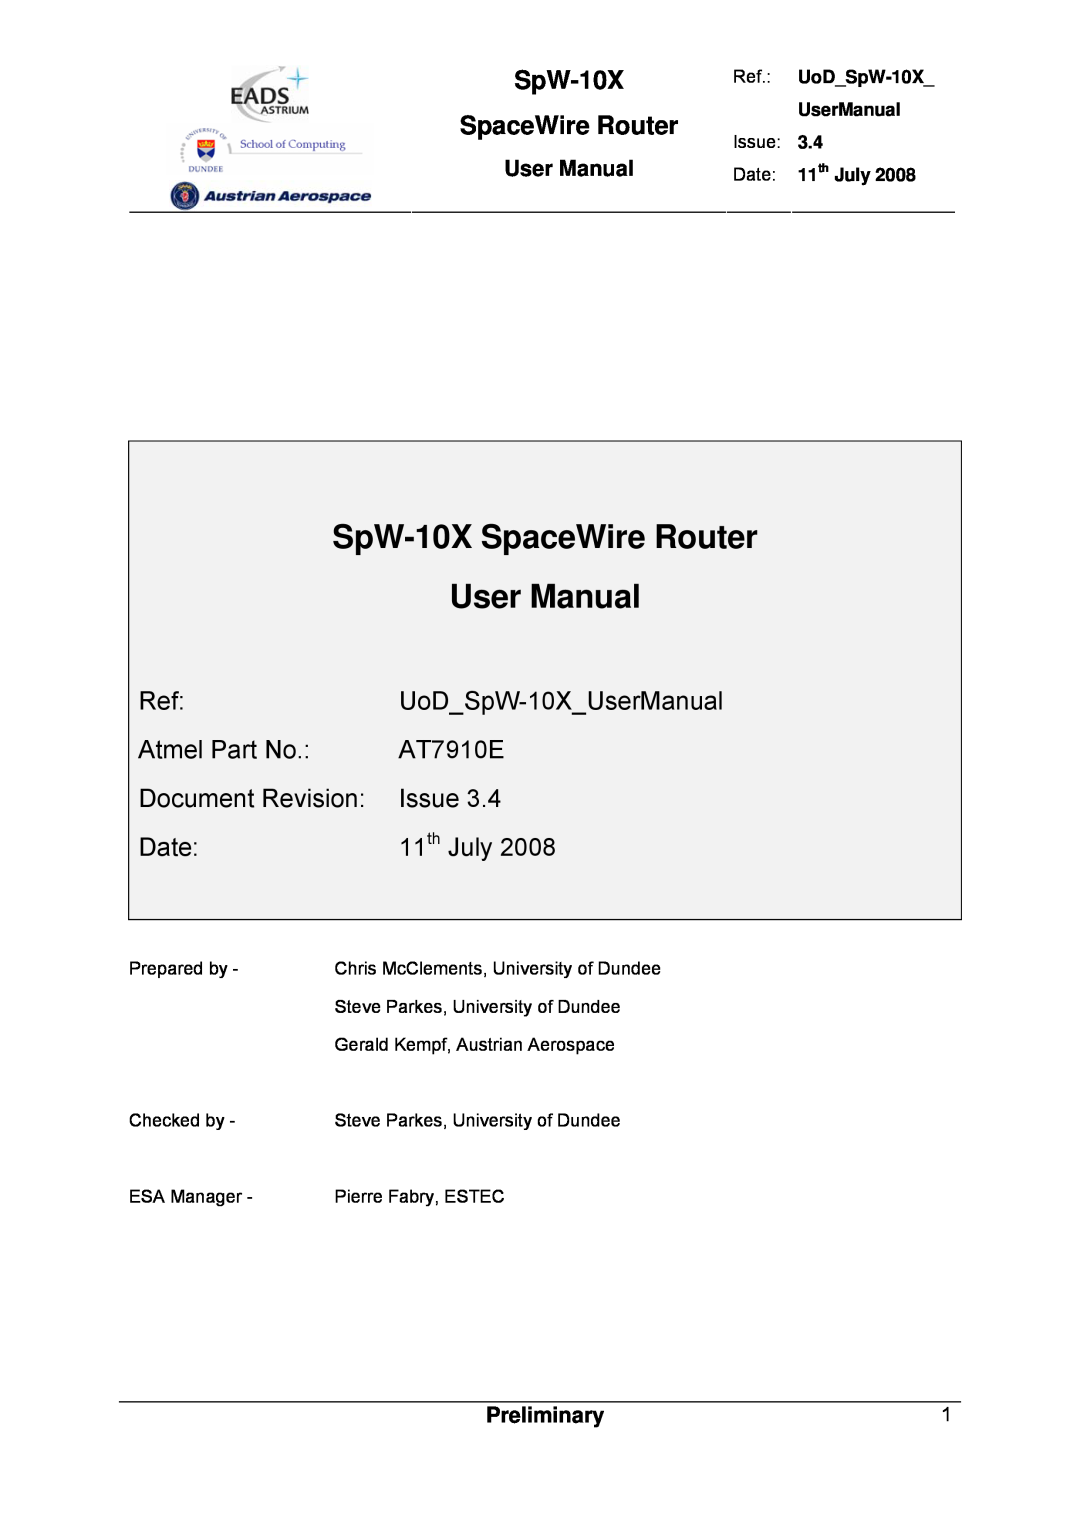 Atmel SpW-10X user manual Atmel Part No, AT7910E, Document Revision, Issue, Date, th July, SpaceWire Router, User Manual 